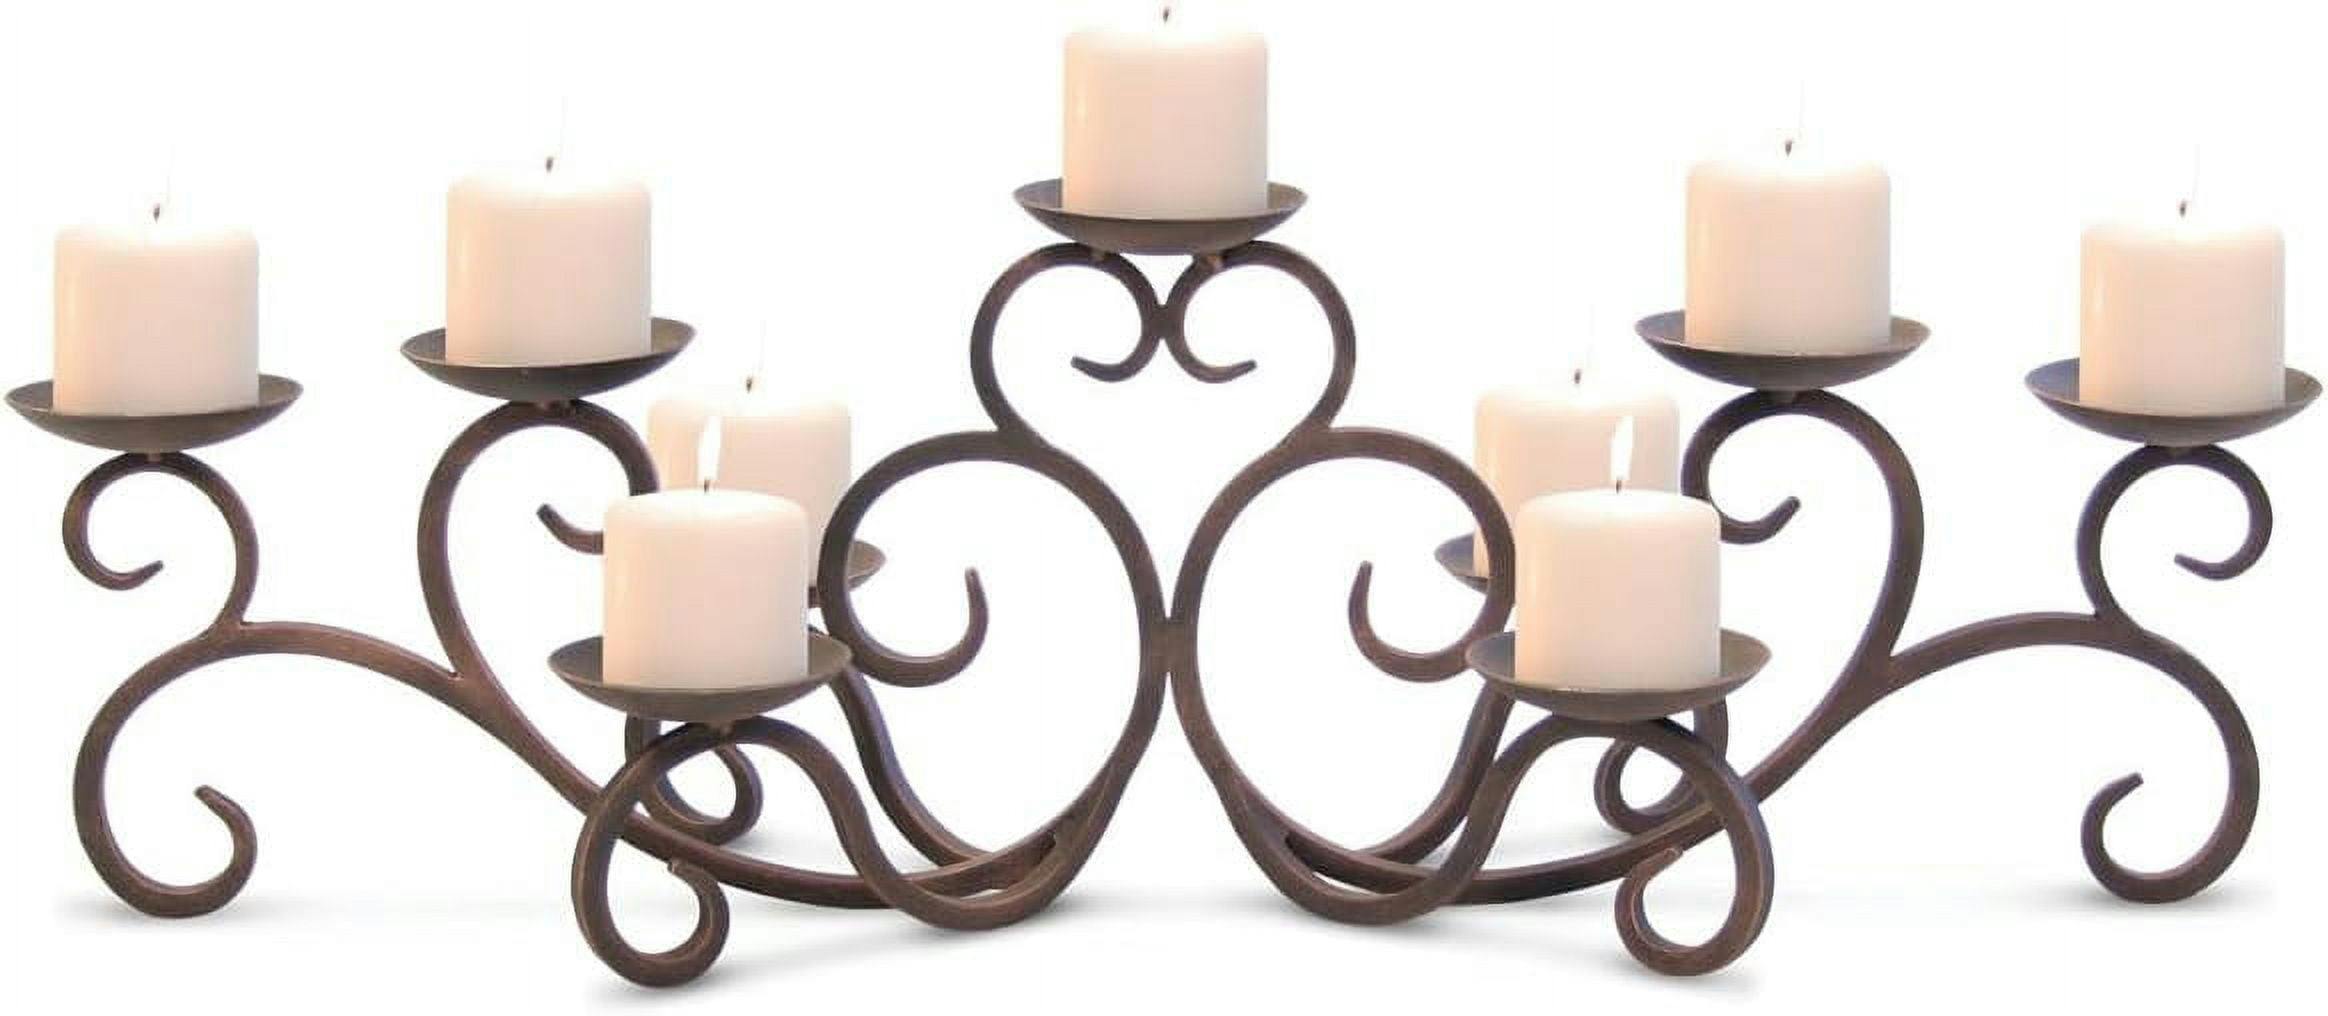 Hand-Forged Distressed Bronze Tabletop Candelabra, 31.5"W